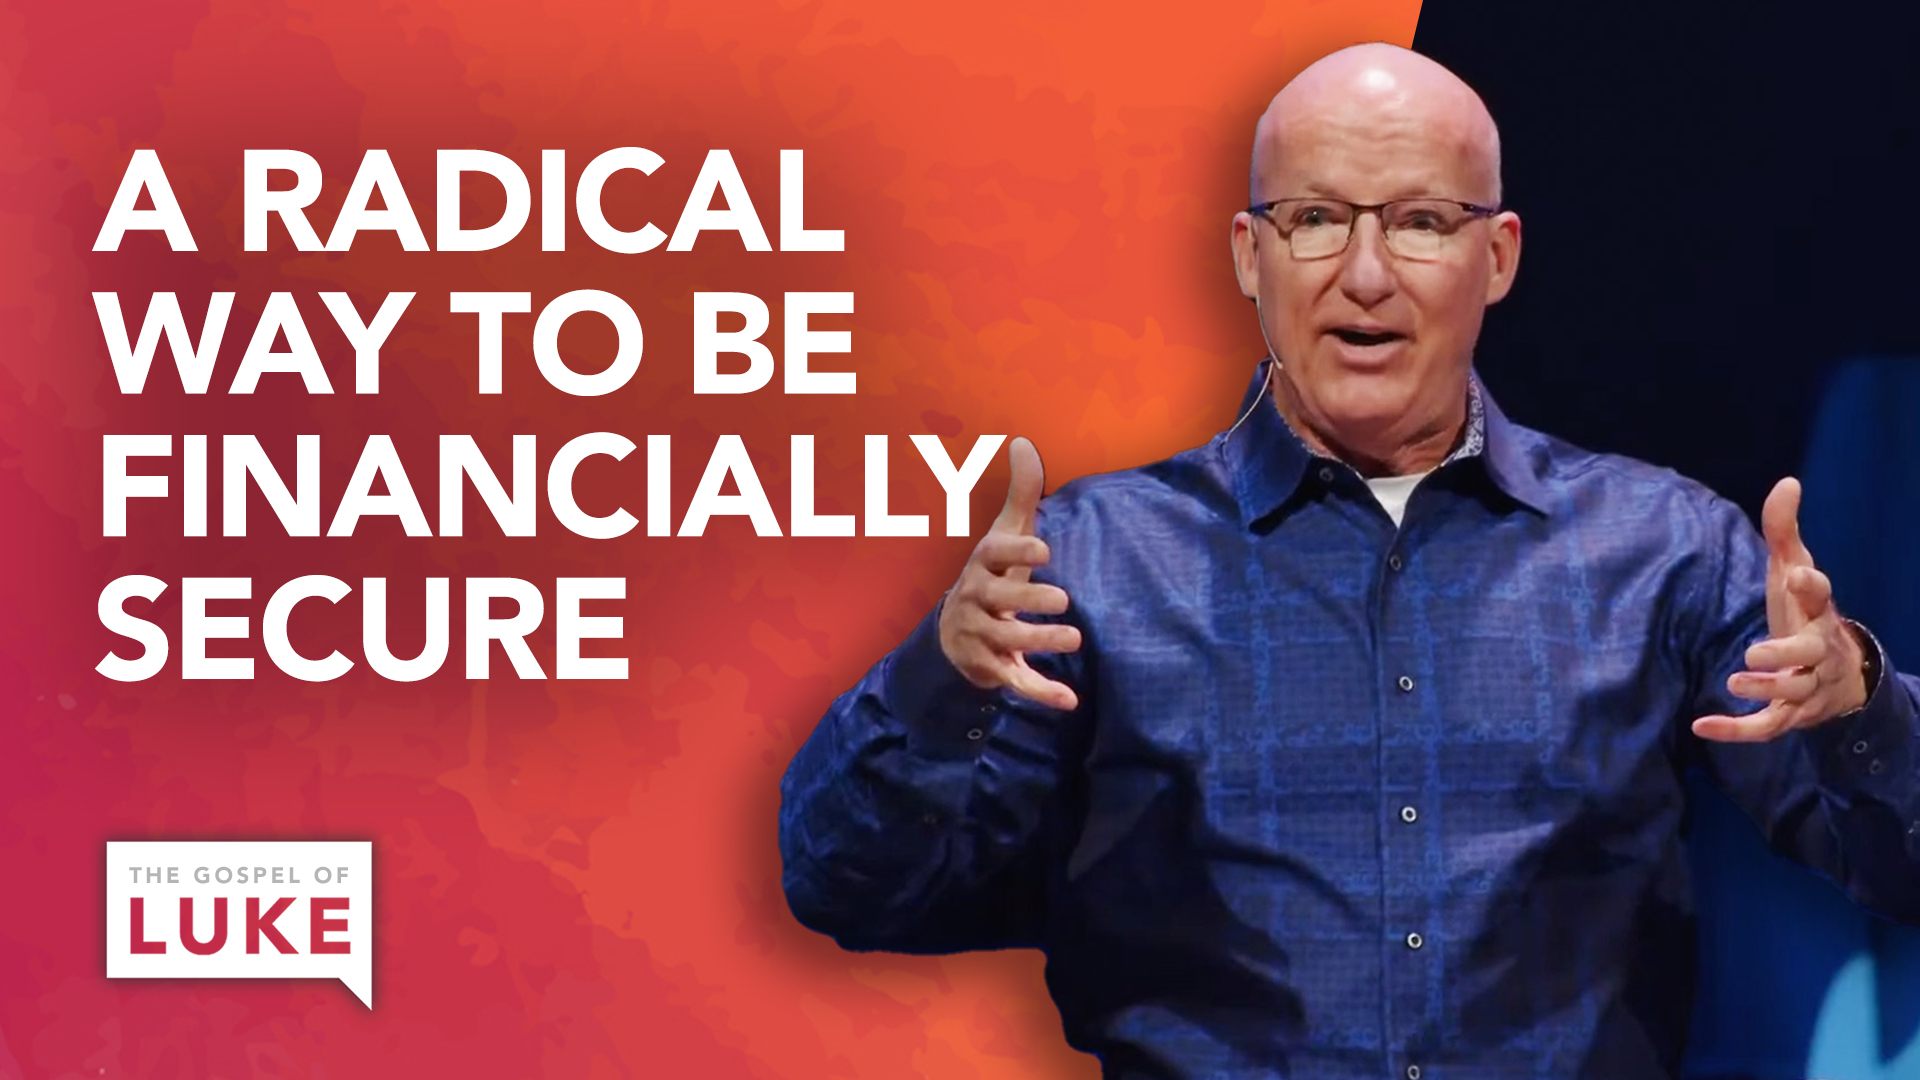 59 – A Radical Way to Be Financially Secure